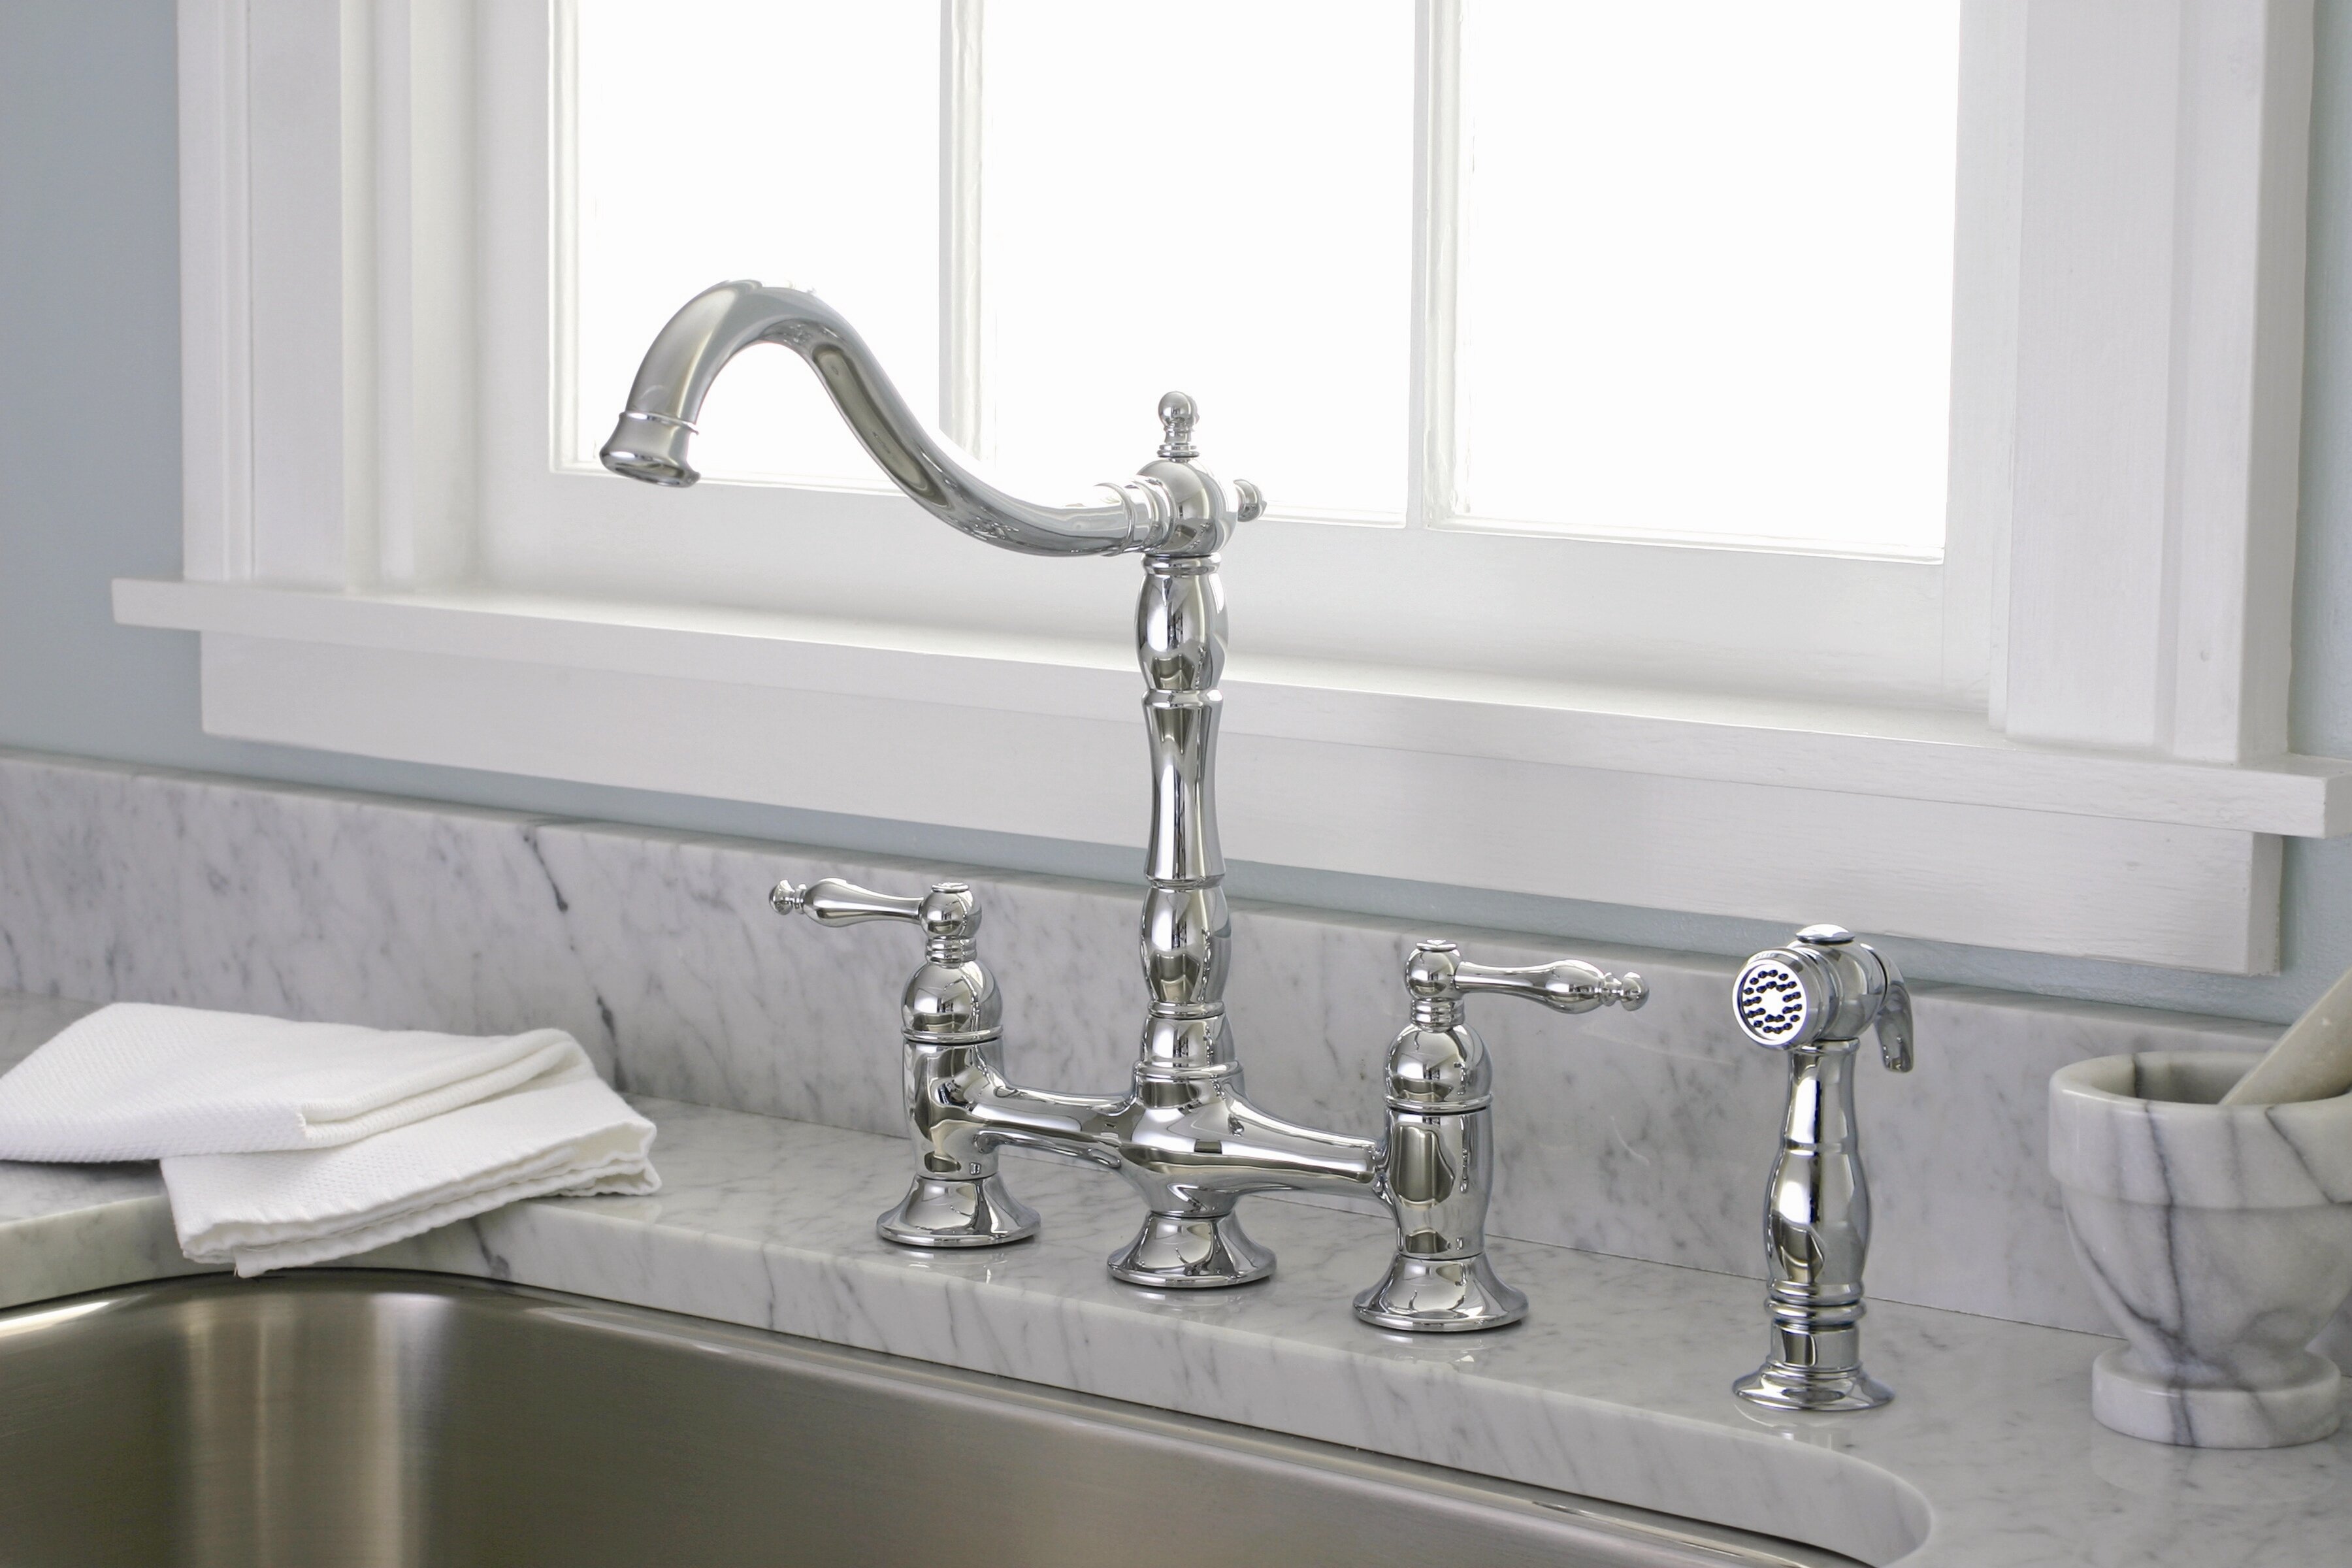 Charlestown Bridge Faucet With Side Spray